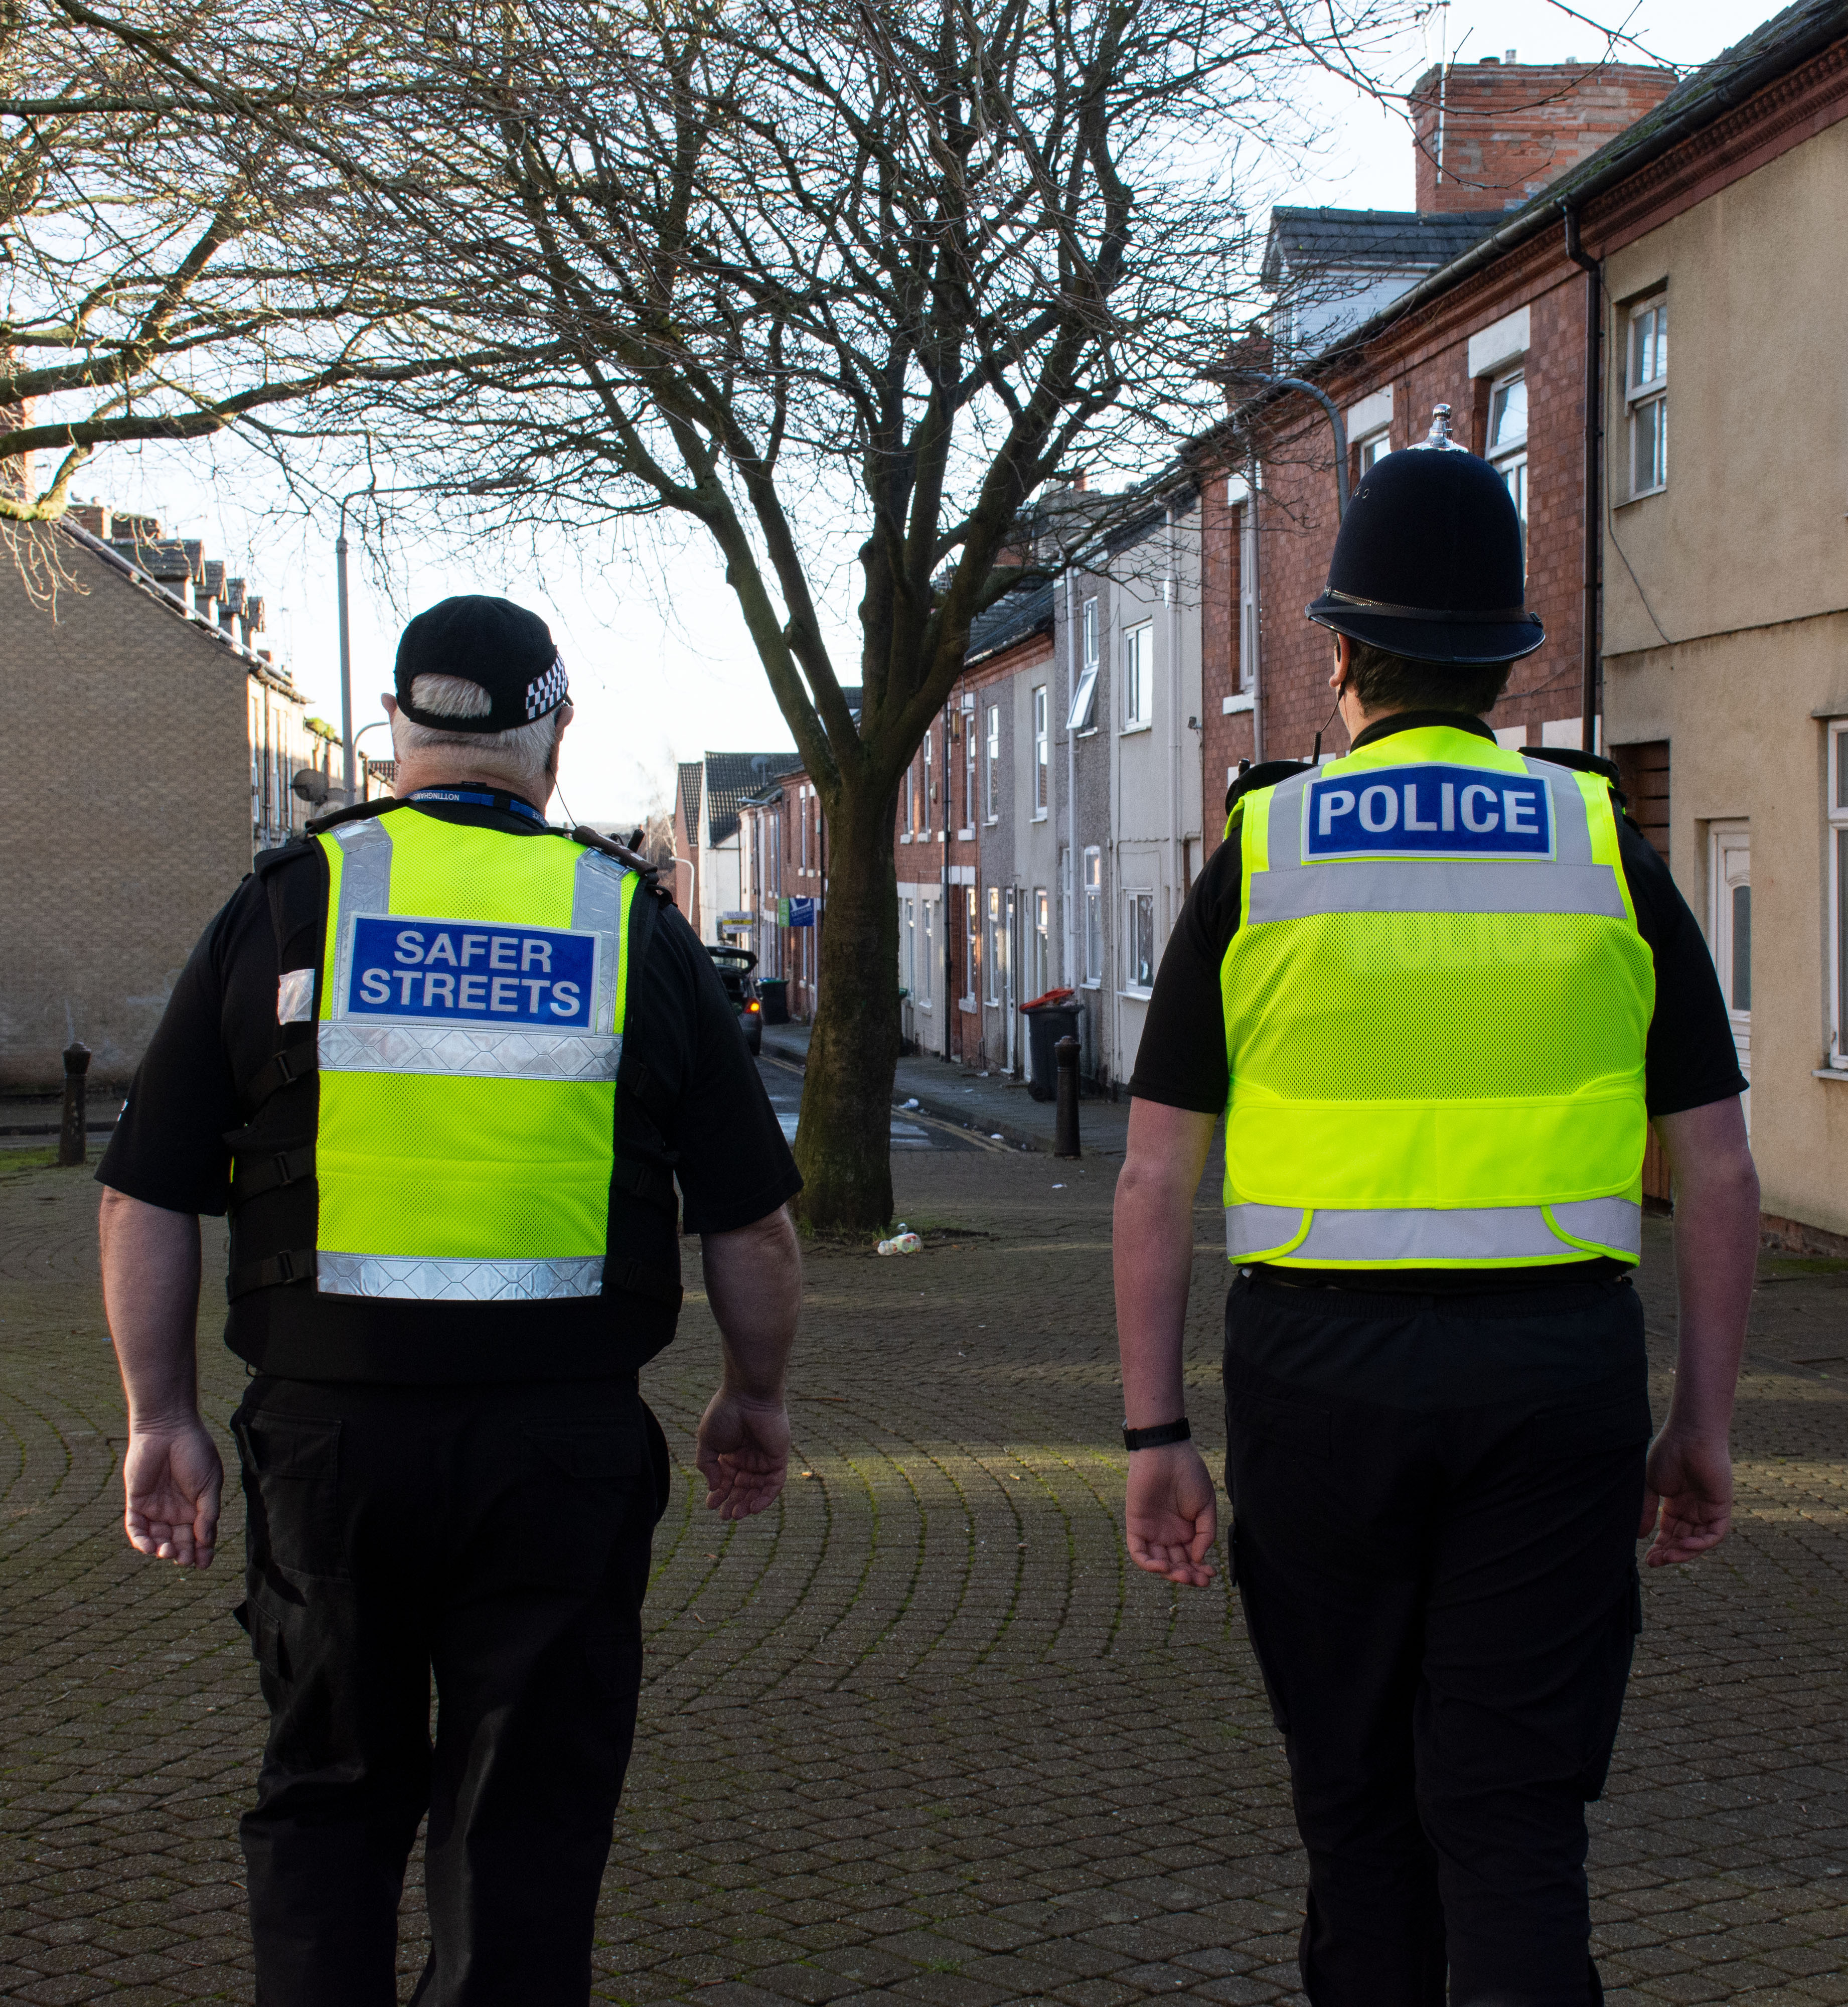 A Police Officer and a Community Protection Officer on patrol on the streets of Ashfield